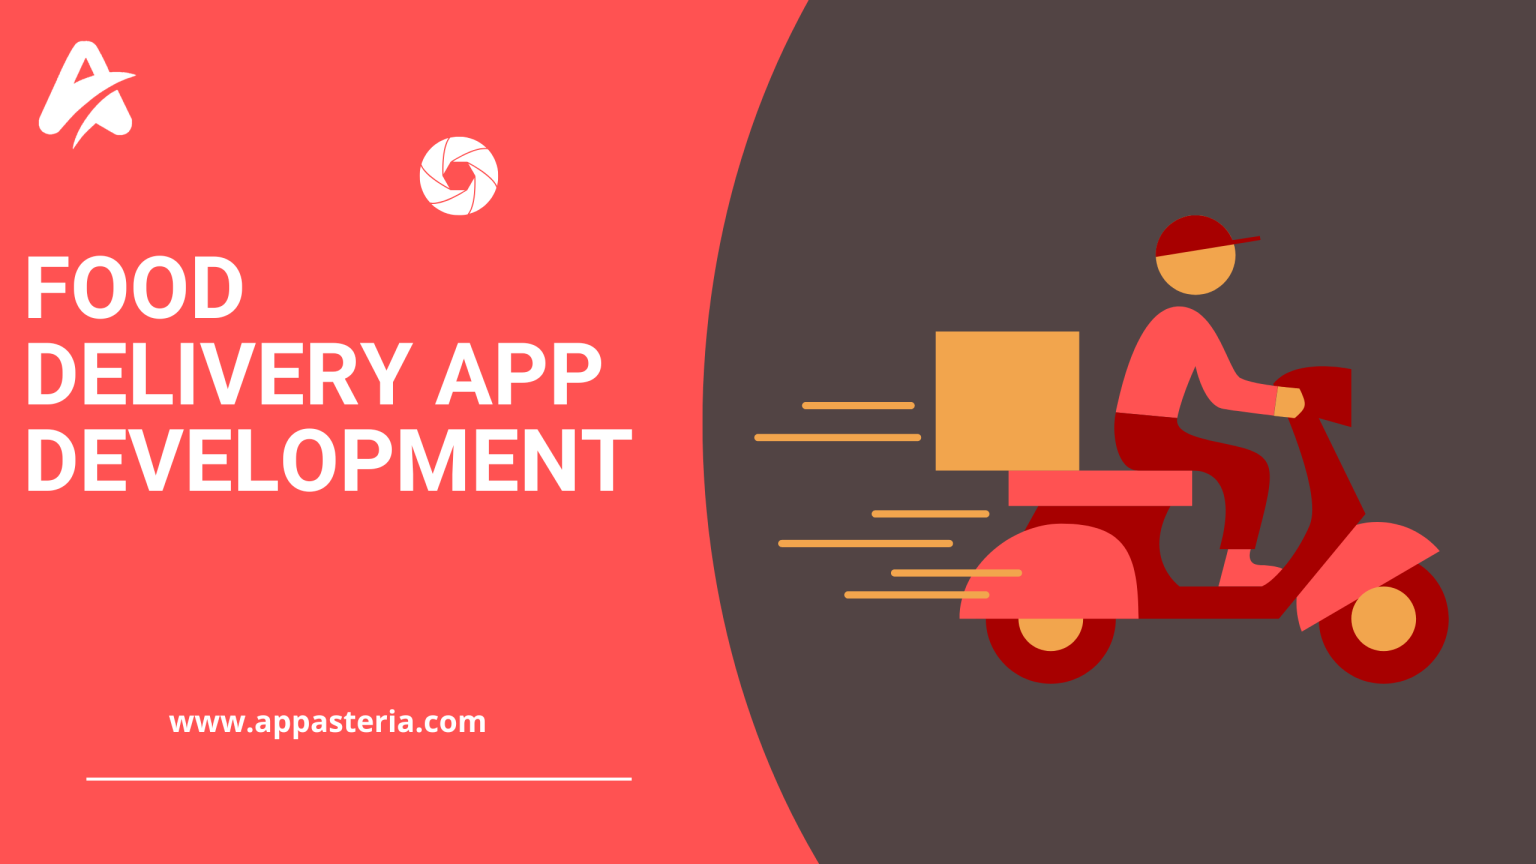 Food Delivery App Development Read It In 5 Minutes Appasteria 0050